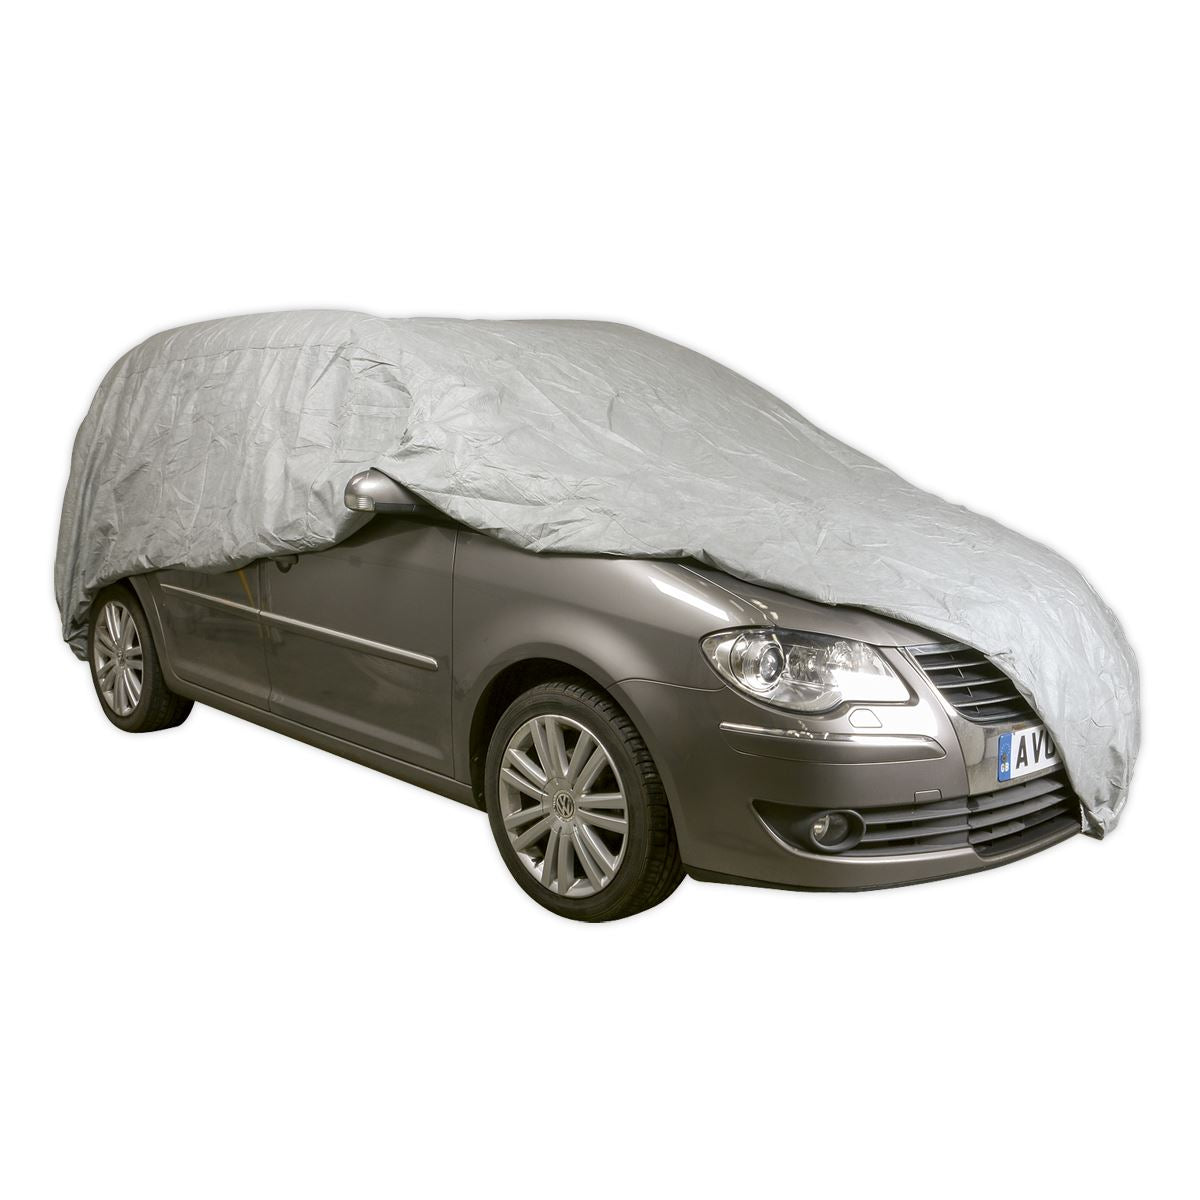 Sealey Premier All Seasons Car Cover 3-Layer - XX-Large